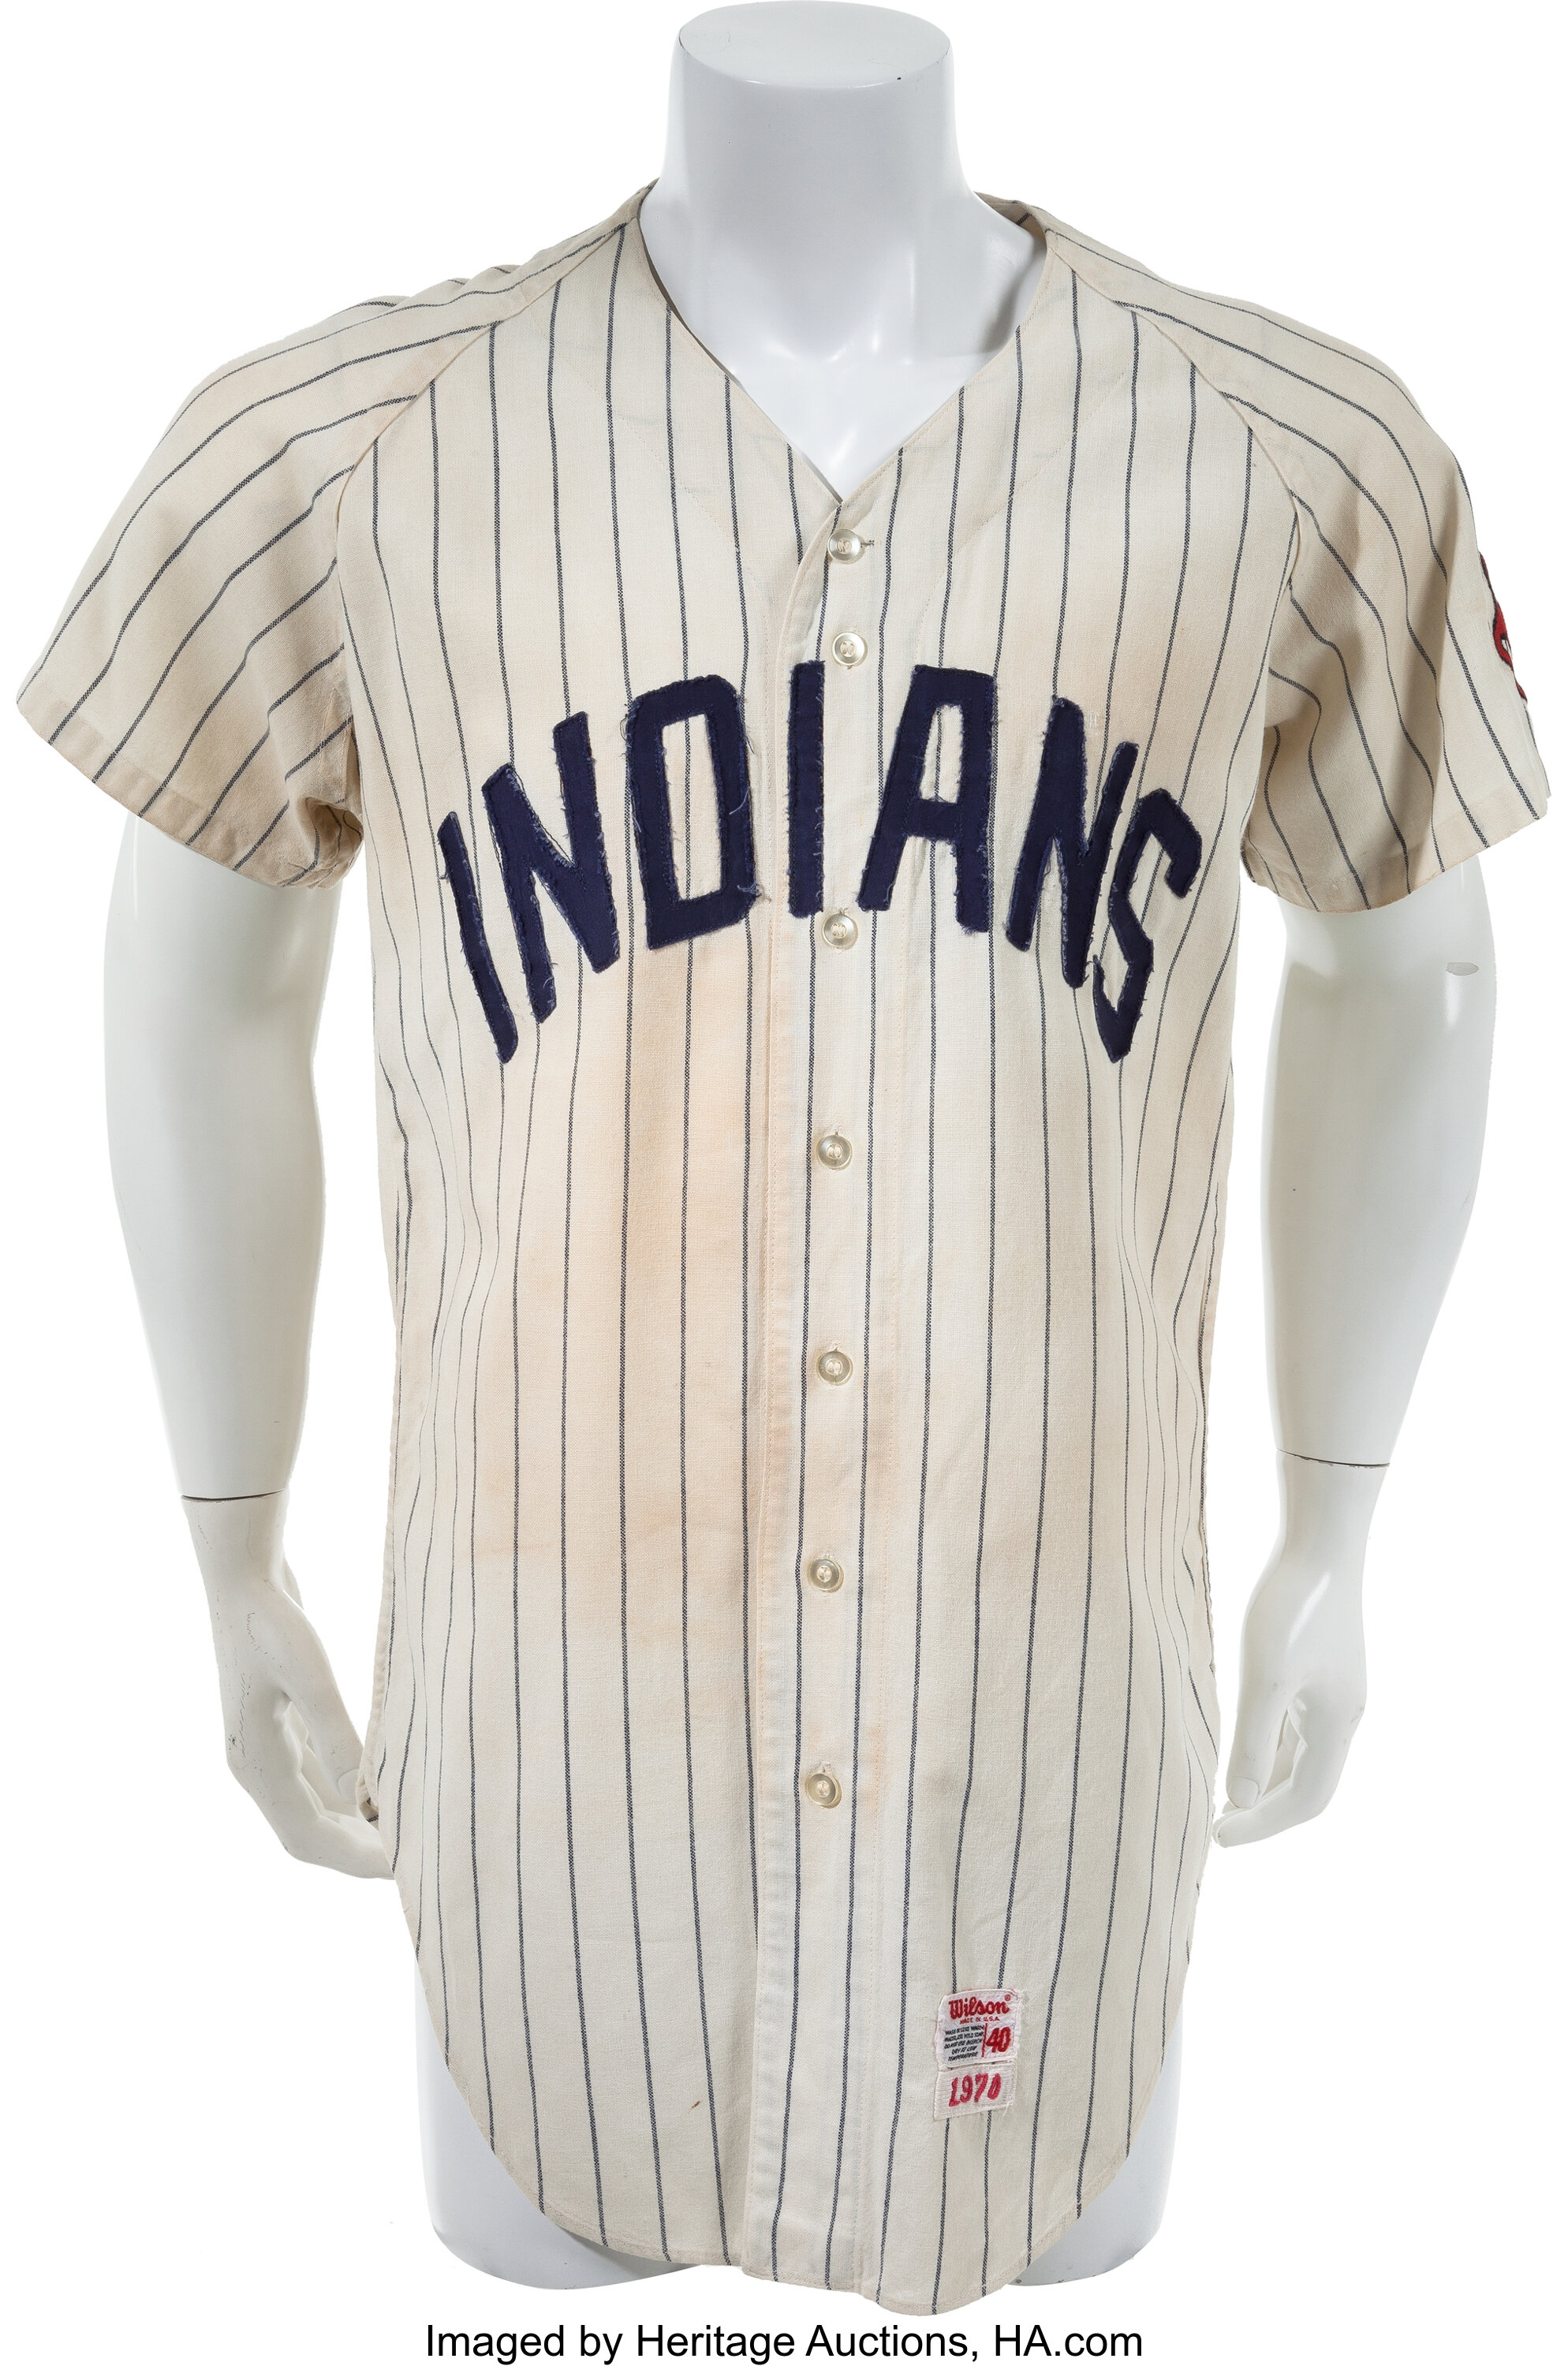 JOHN LOWENSTEIN  Cleveland Indians 1970 Away Majestic Throwback